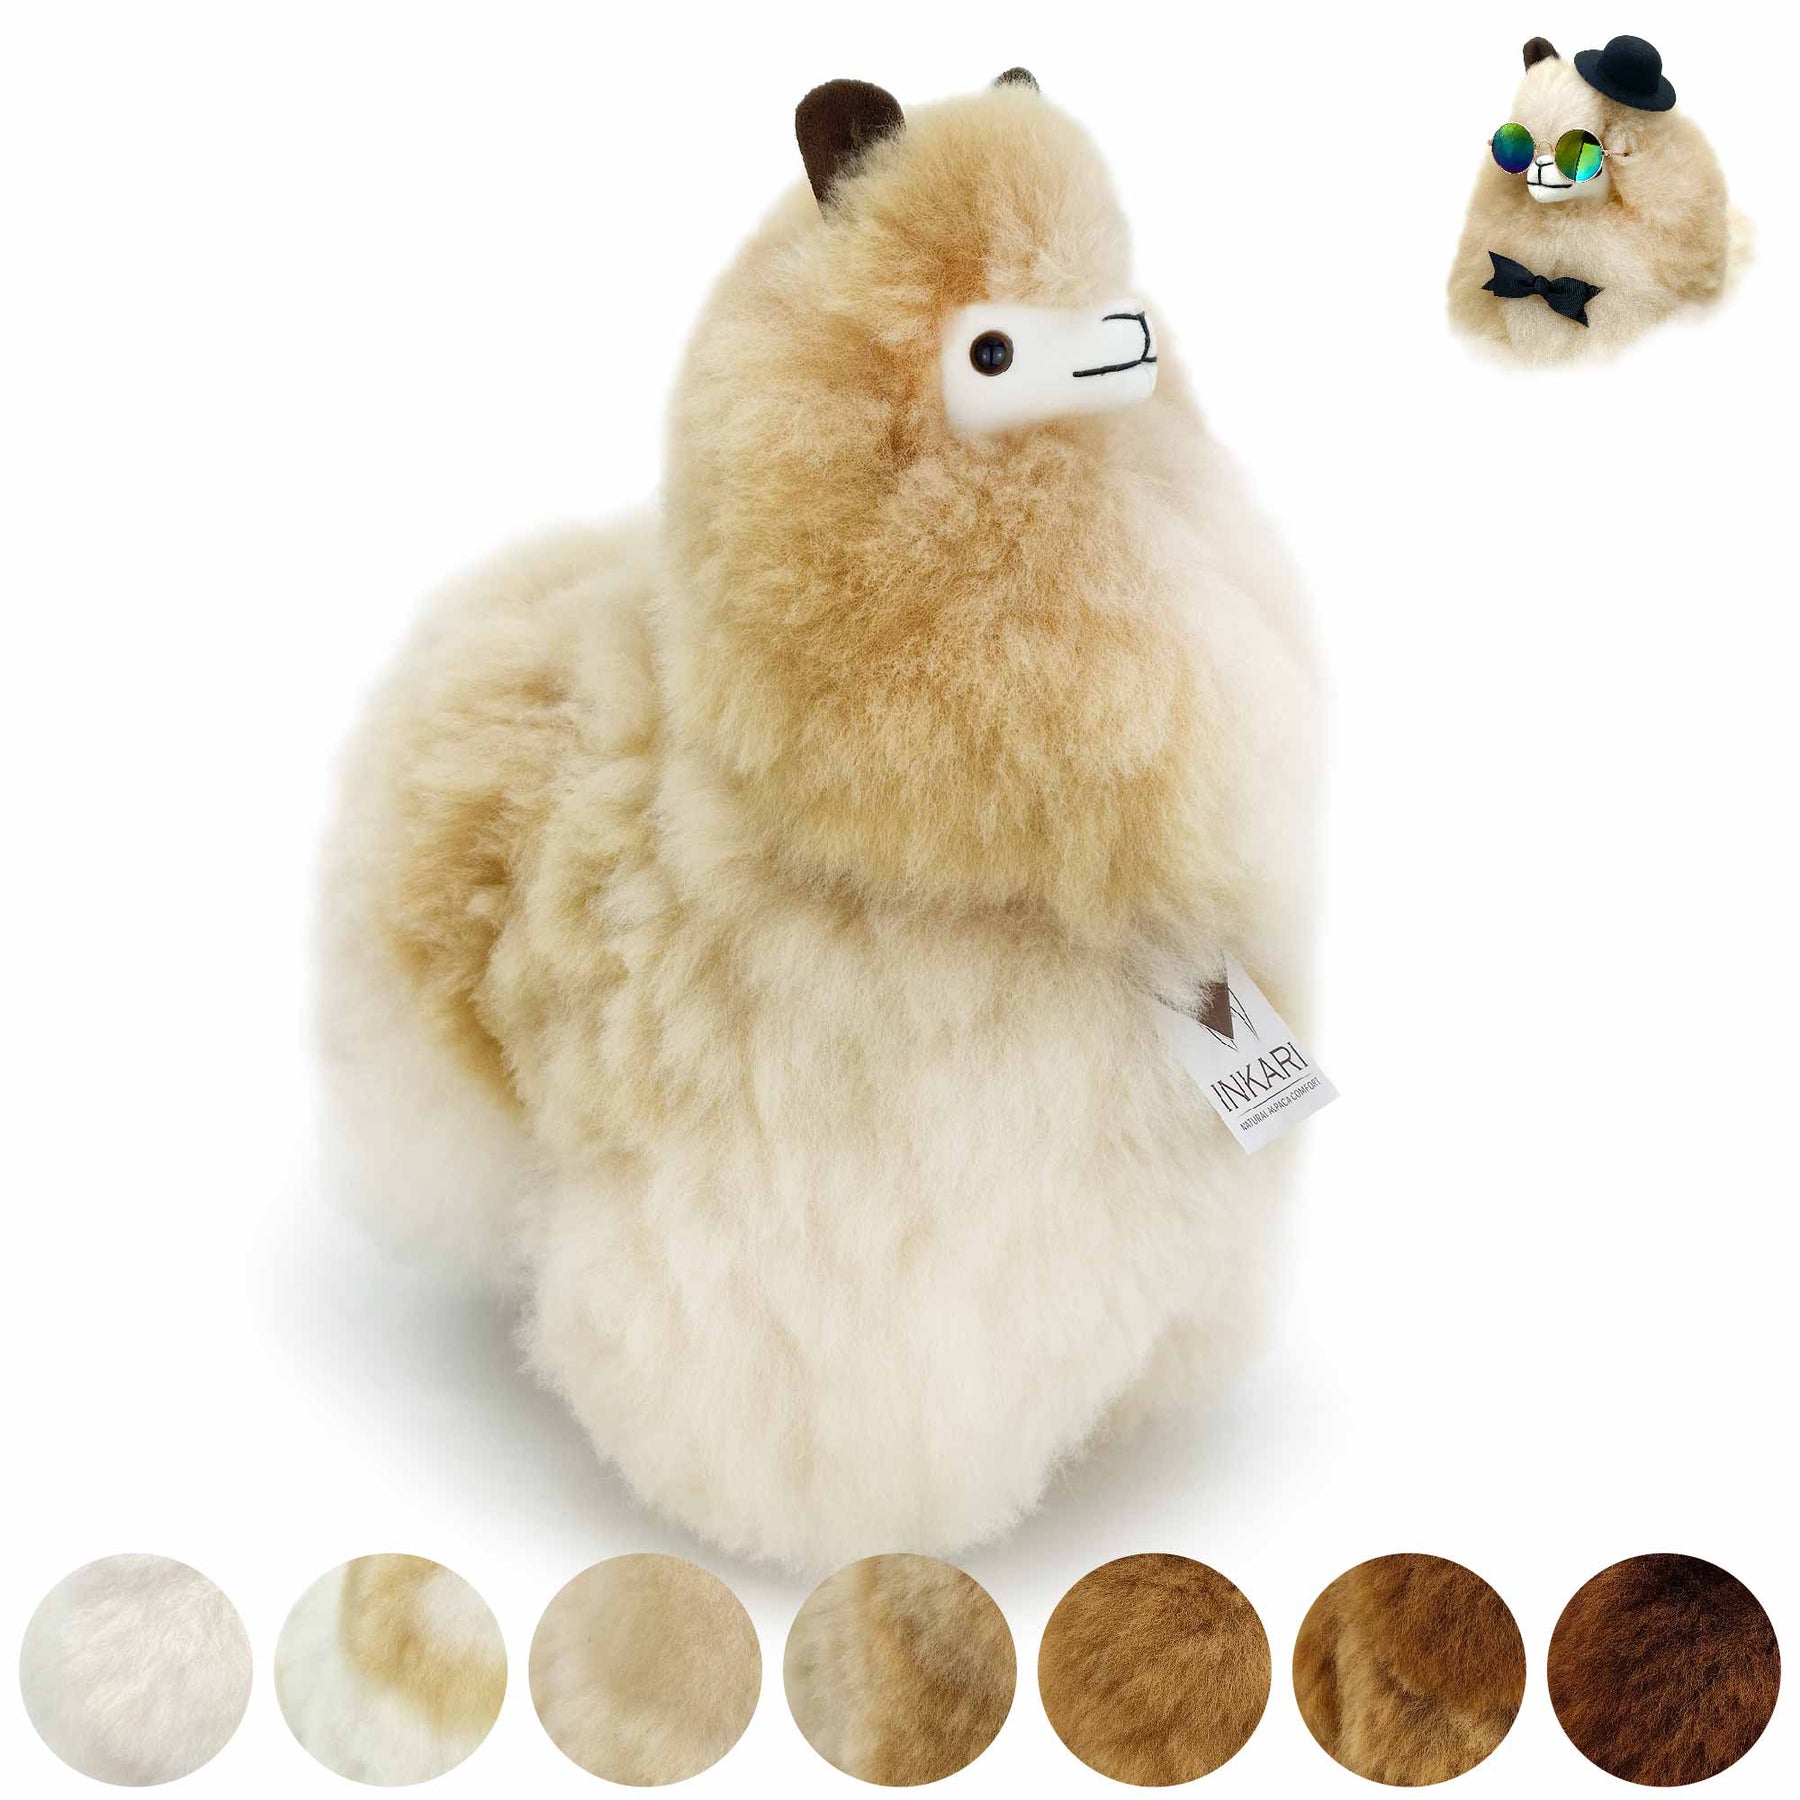 Naturals - All Sizes ❤ Fluffy Toy Stuffed Animal Fairtrade Gift